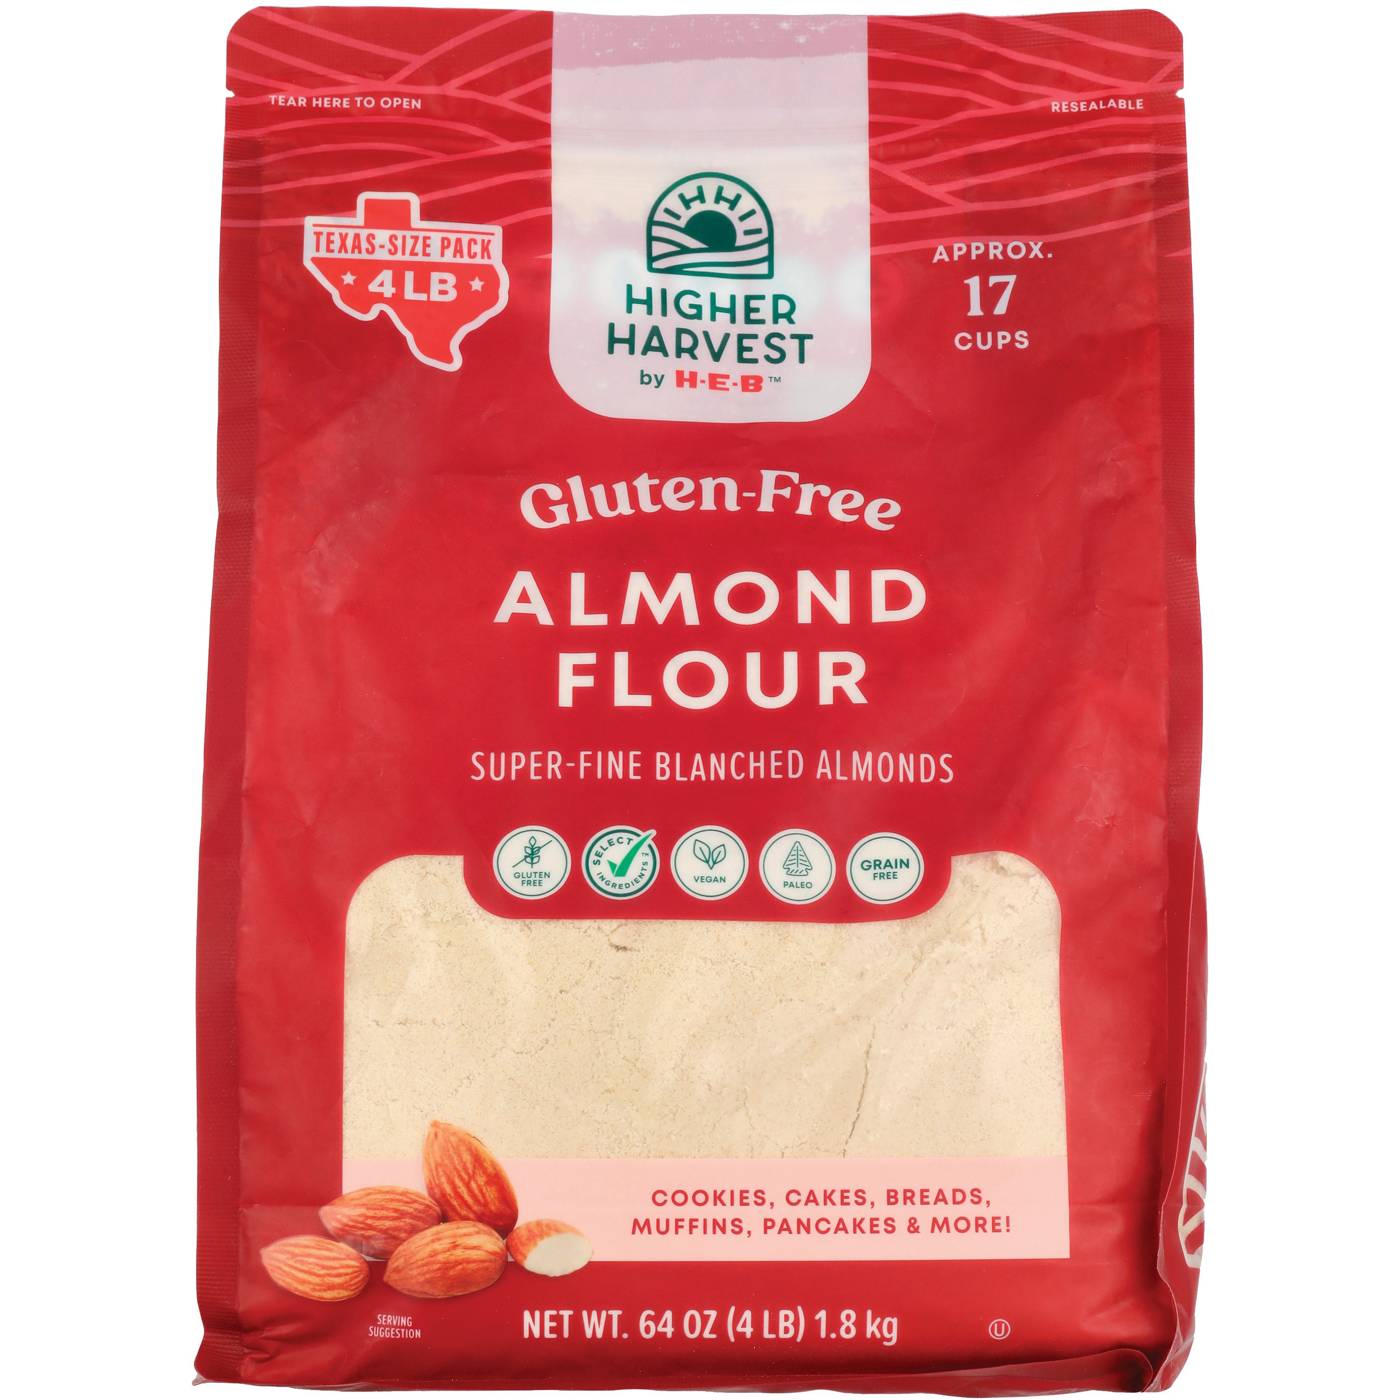 Higher Harvest by H-E-B Gluten-Free Almond Flour – Texas-Size Pack; image 1 of 3